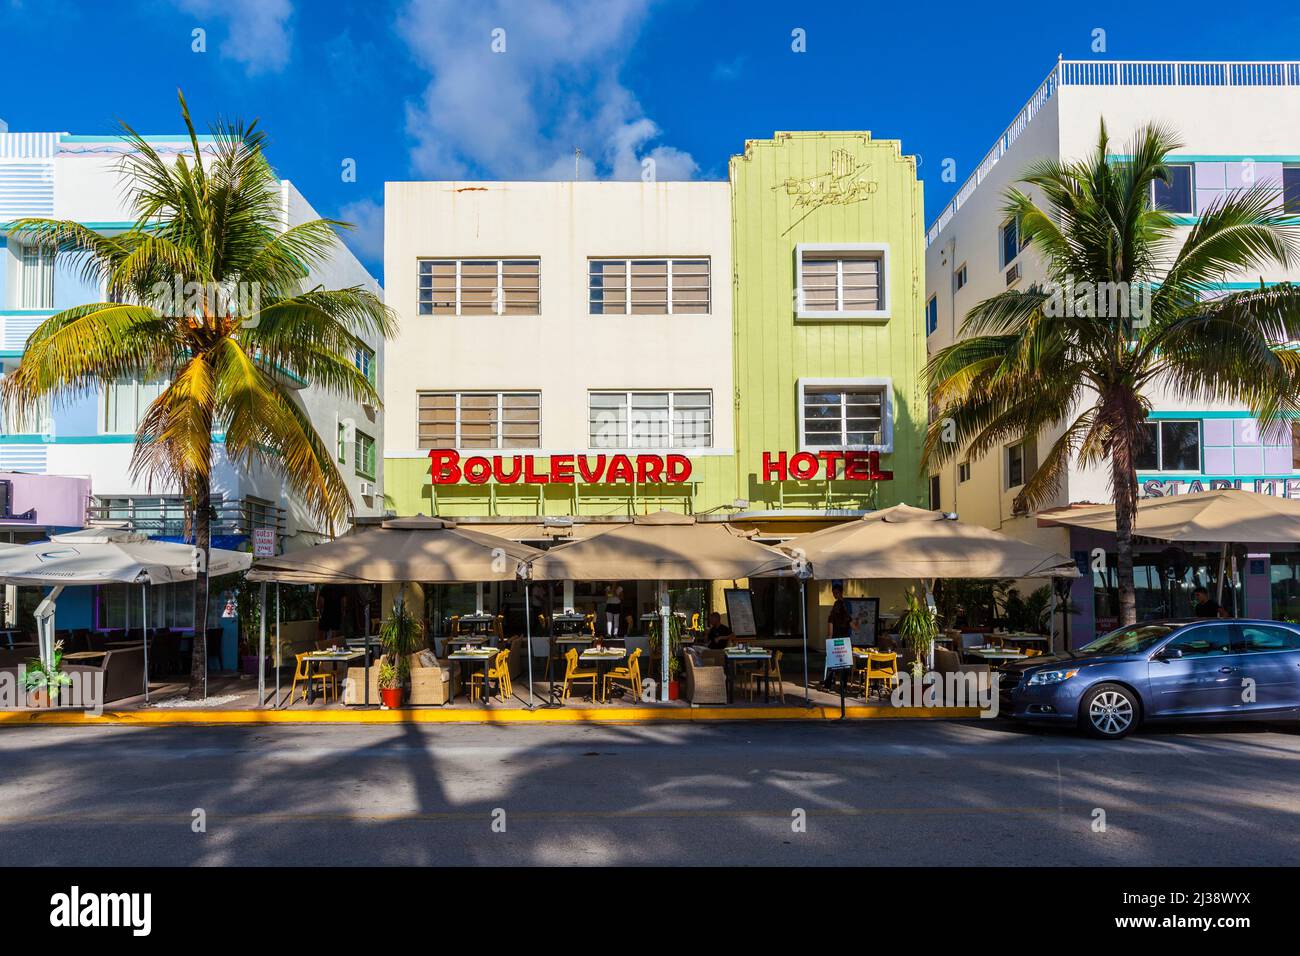 MIAMI, USA - AUG 5, 2013: The Boulevard hotel located next to Colony Hotel at Ocean Drive and built in the 1930's is one of the most photographed hote Stock Photo